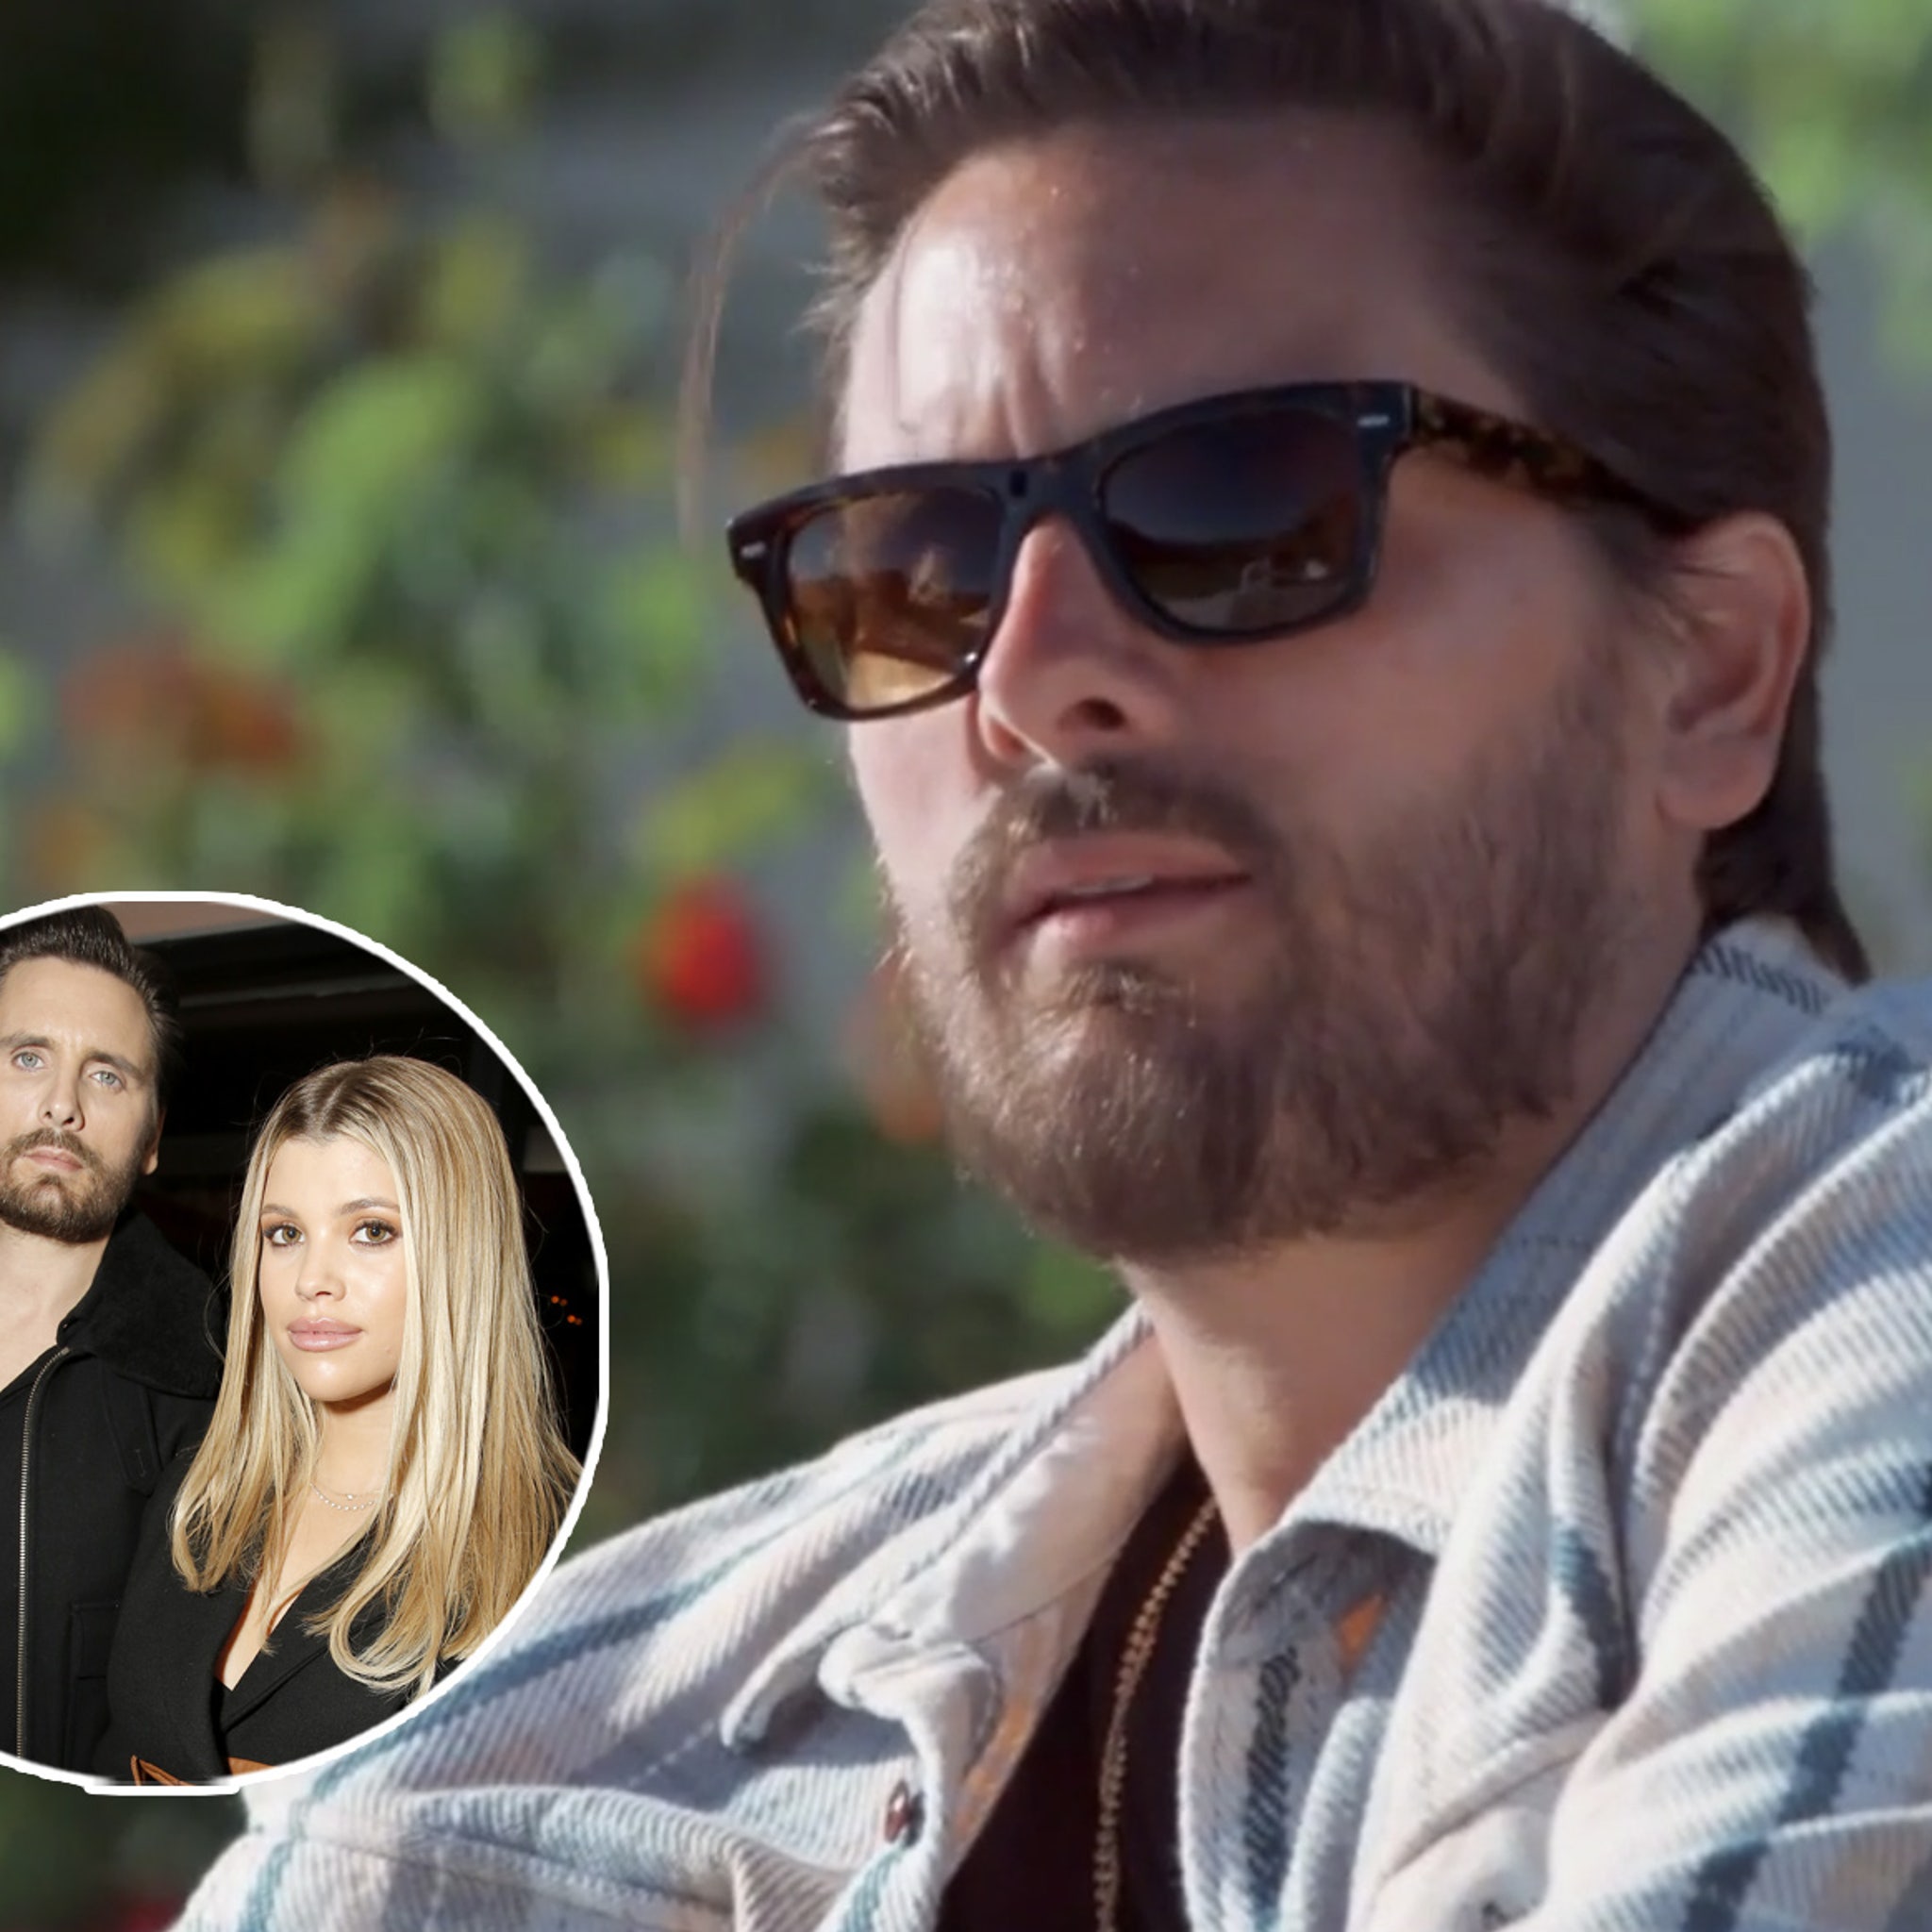 Scott Disick turns down six-figure offer to appear on Celebrity